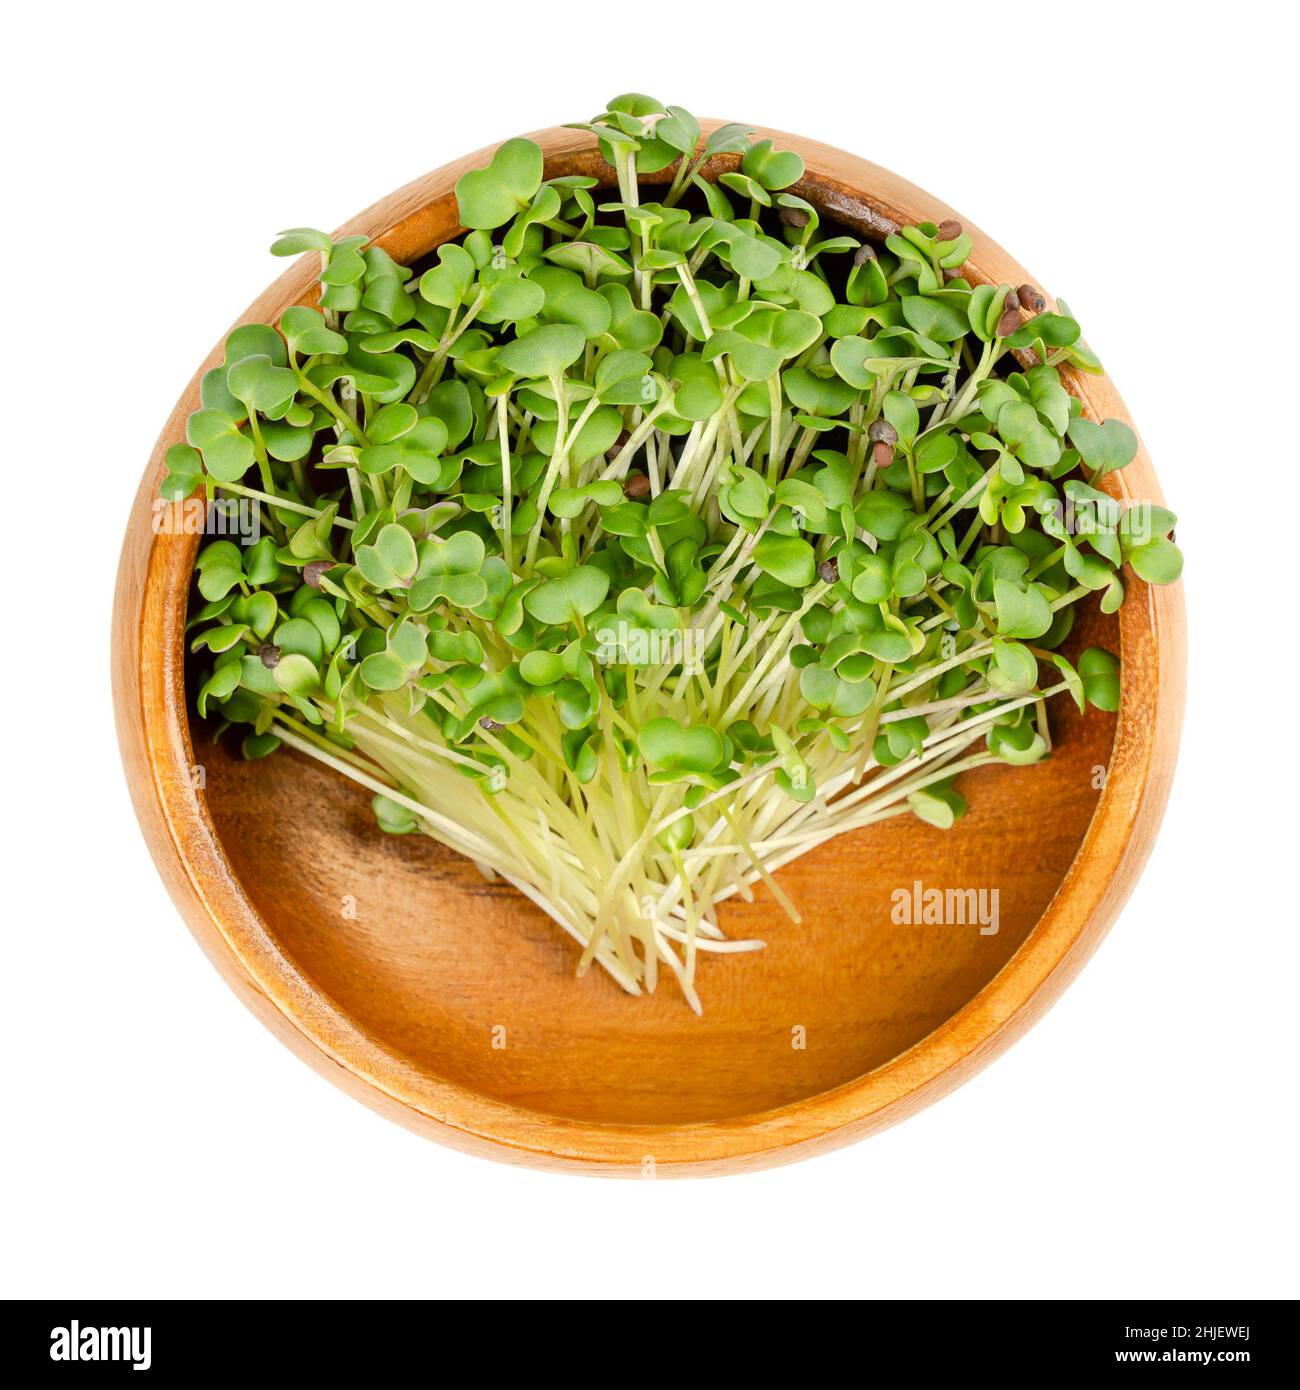 Black mustard microgreen, in a wooden bowl. Young leaves, shoots and cotyledons of Brassica nigra, an edible herb, used as wholesome salad garnish. Stock Photo